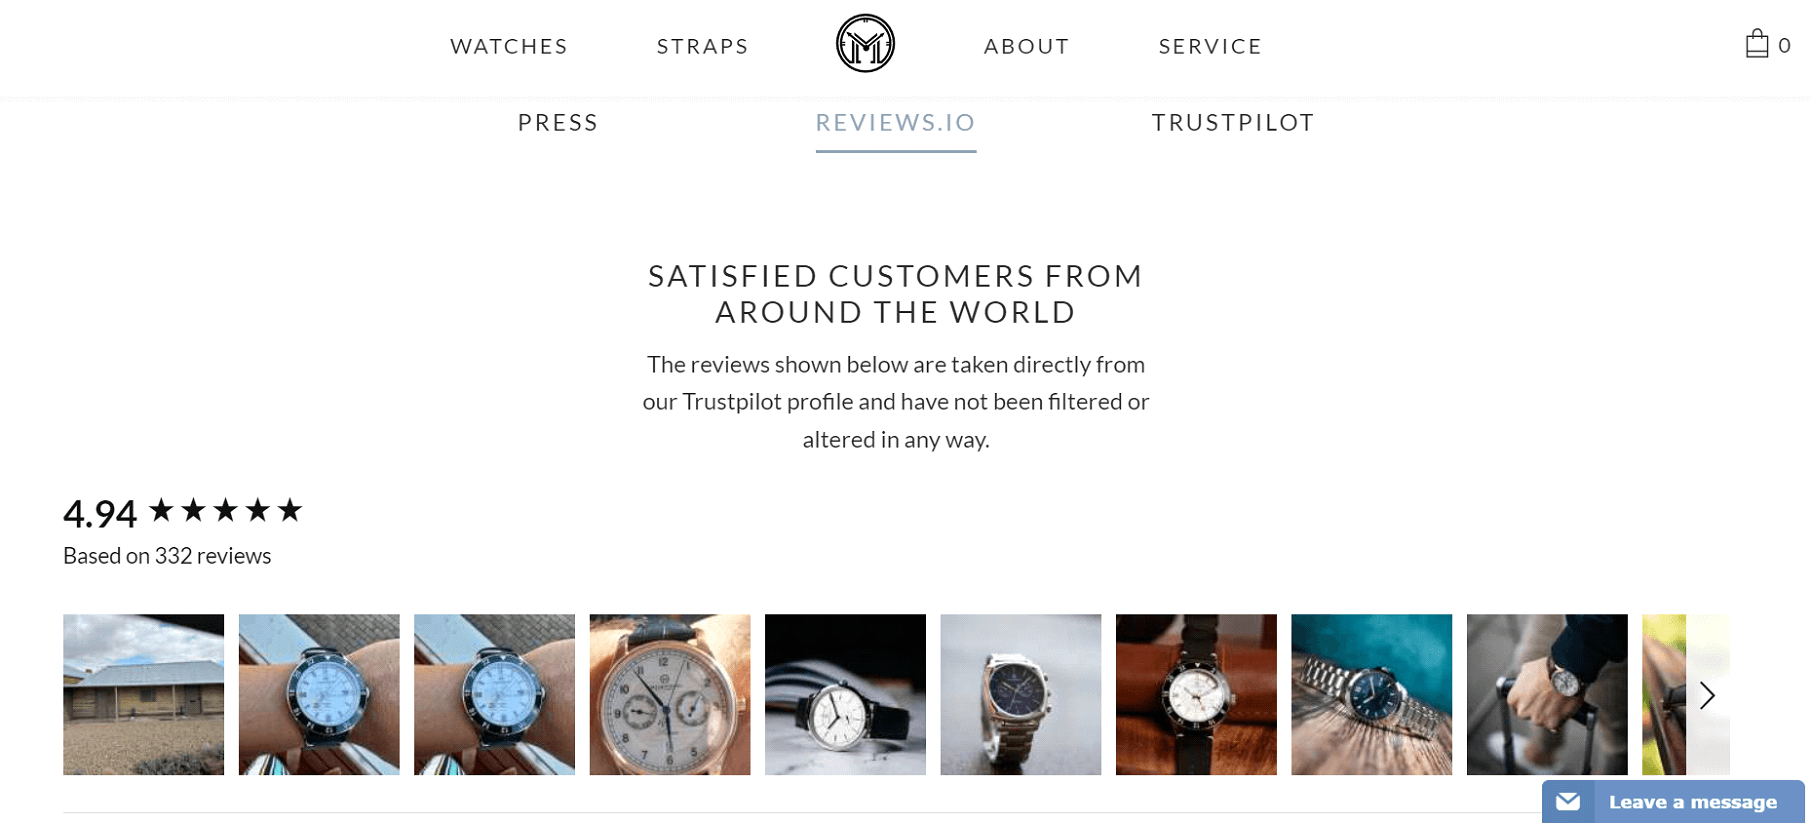 Melbourne Watch Company is an excellent example for a classy reviews page